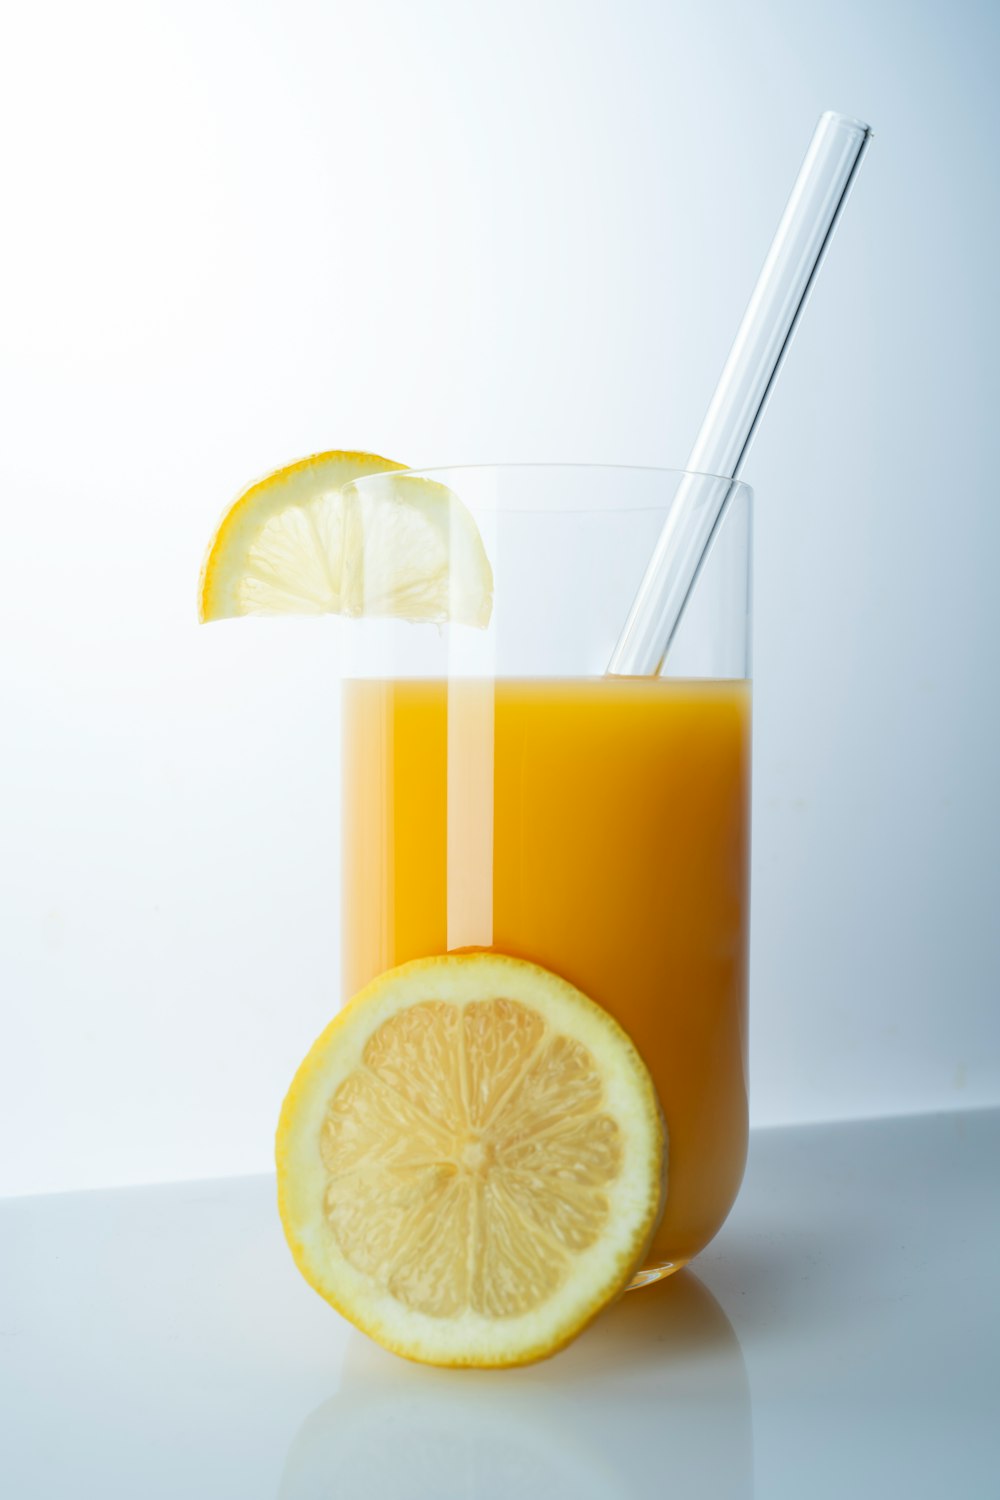 clear drinking glass with yellow liquid and sliced lemon